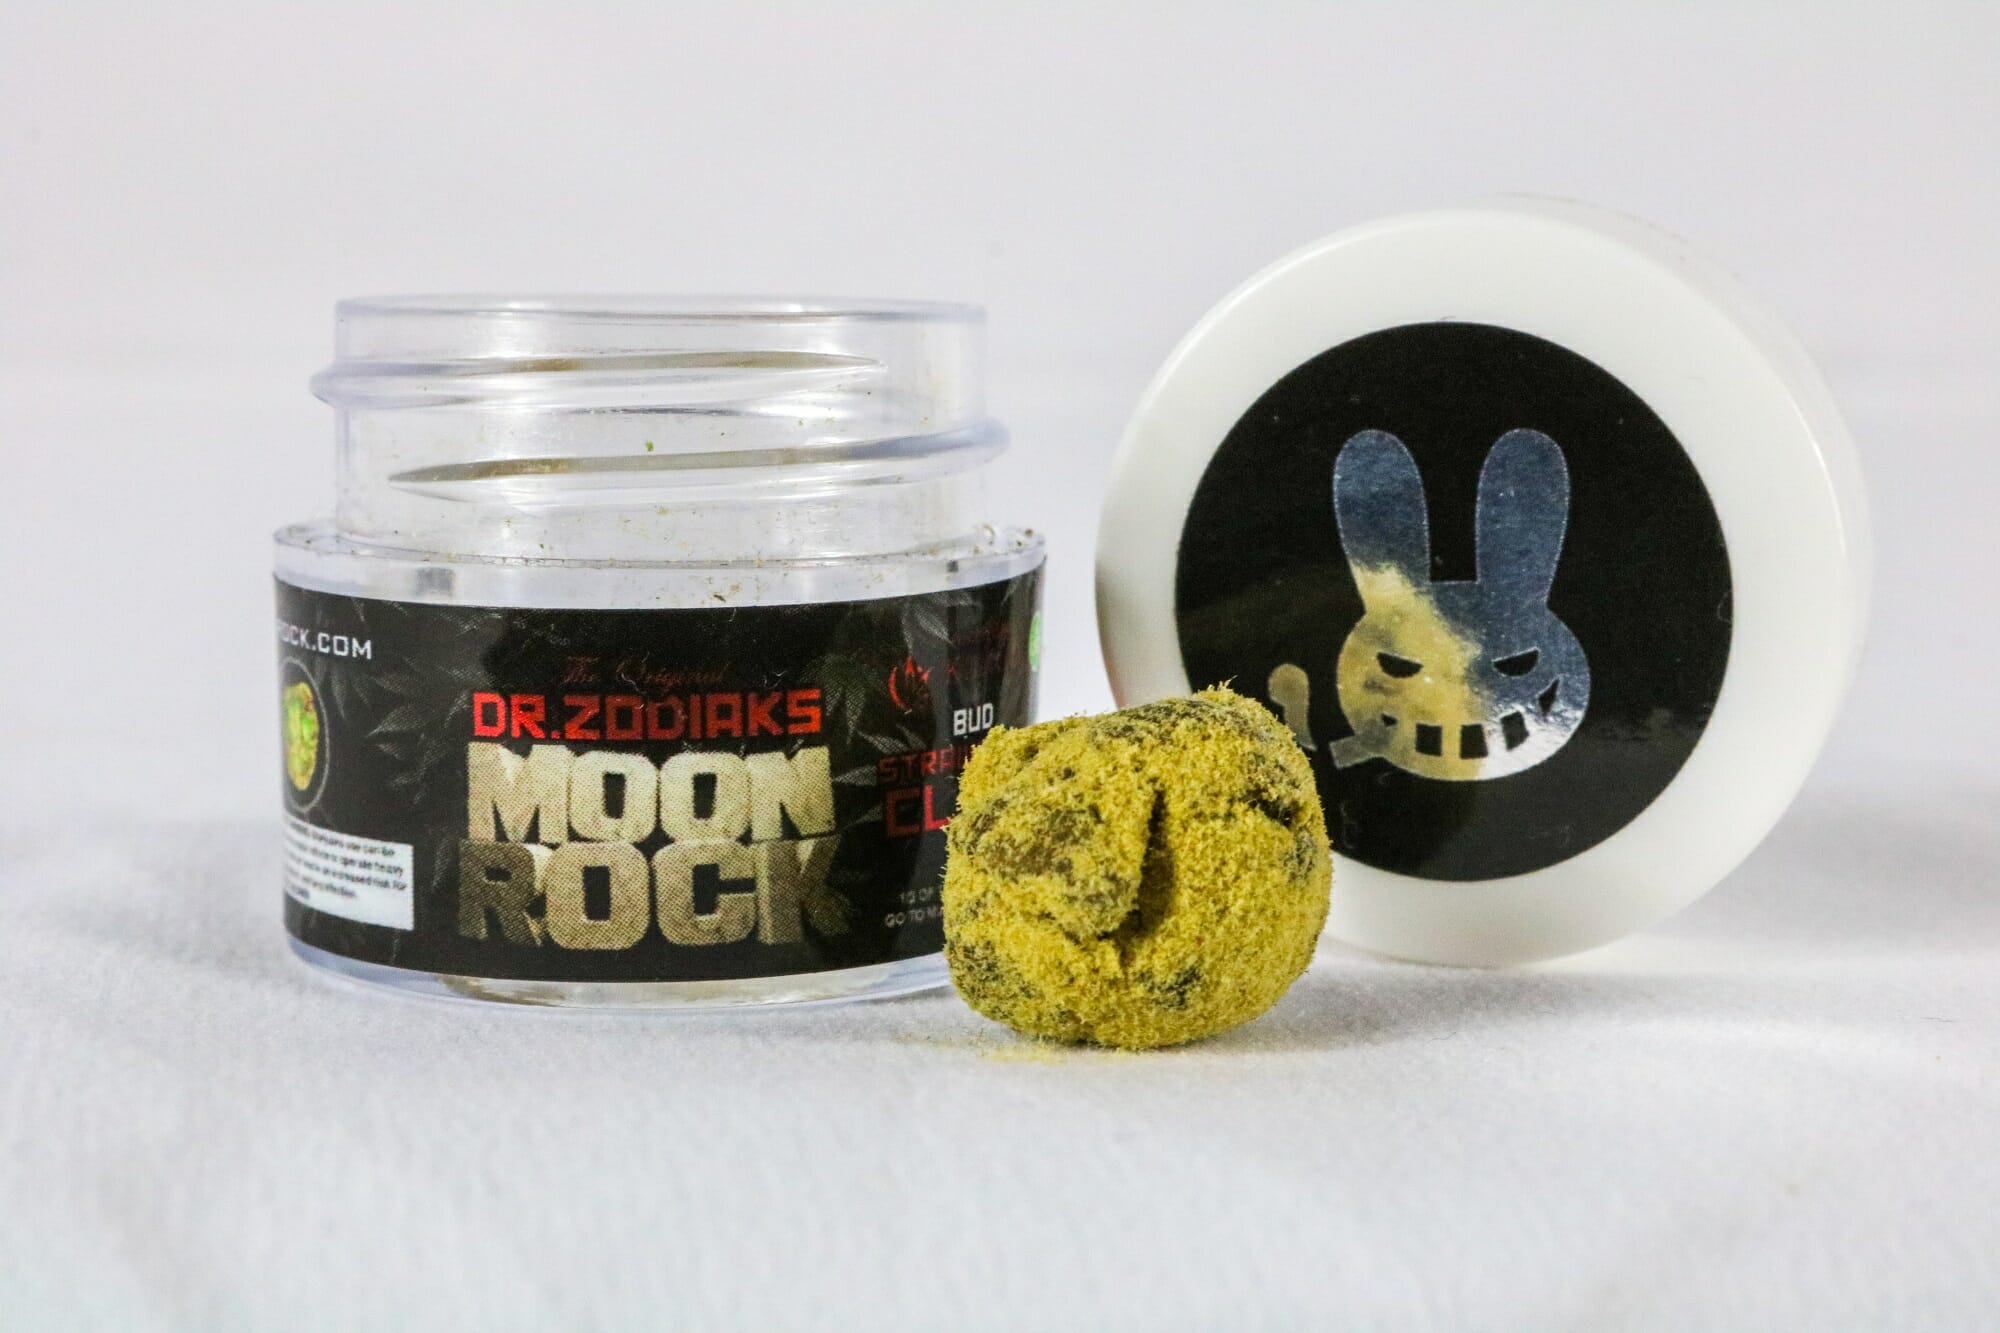 Featured High Strength THC Product: Dr Zodiak's Moon Rocks 